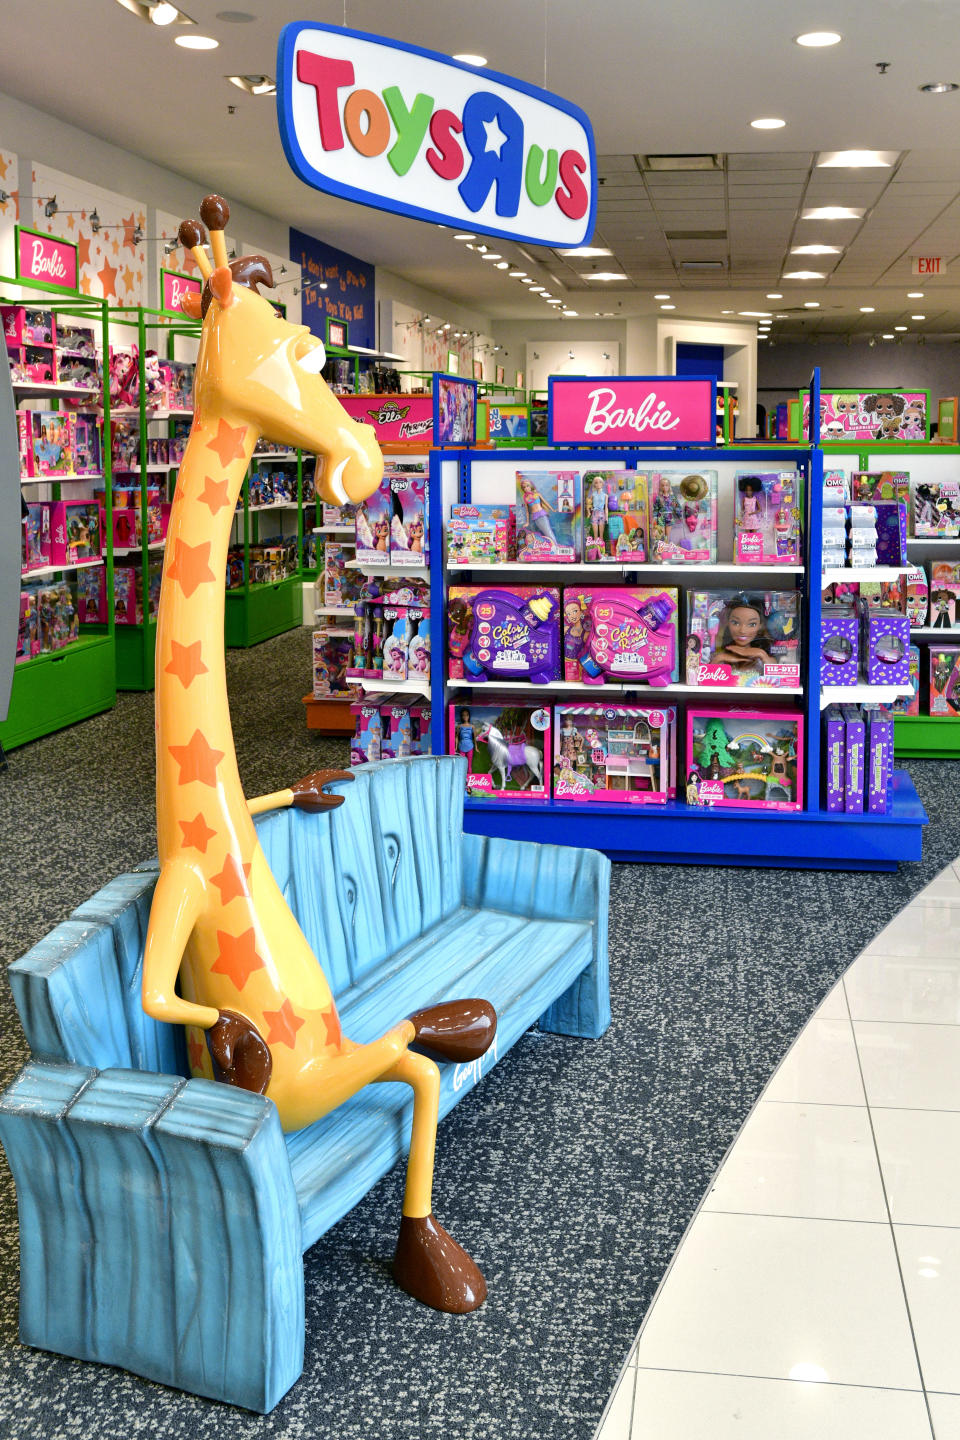 JERSEY CITY, NEW JERSEY - JULY 11: A view of Macy's Toys "R" Us on July 11, 2022 in Jersey City, New Jersey. (Photo by Eugene Gologursky/Getty Images for Macy's, Inc. )